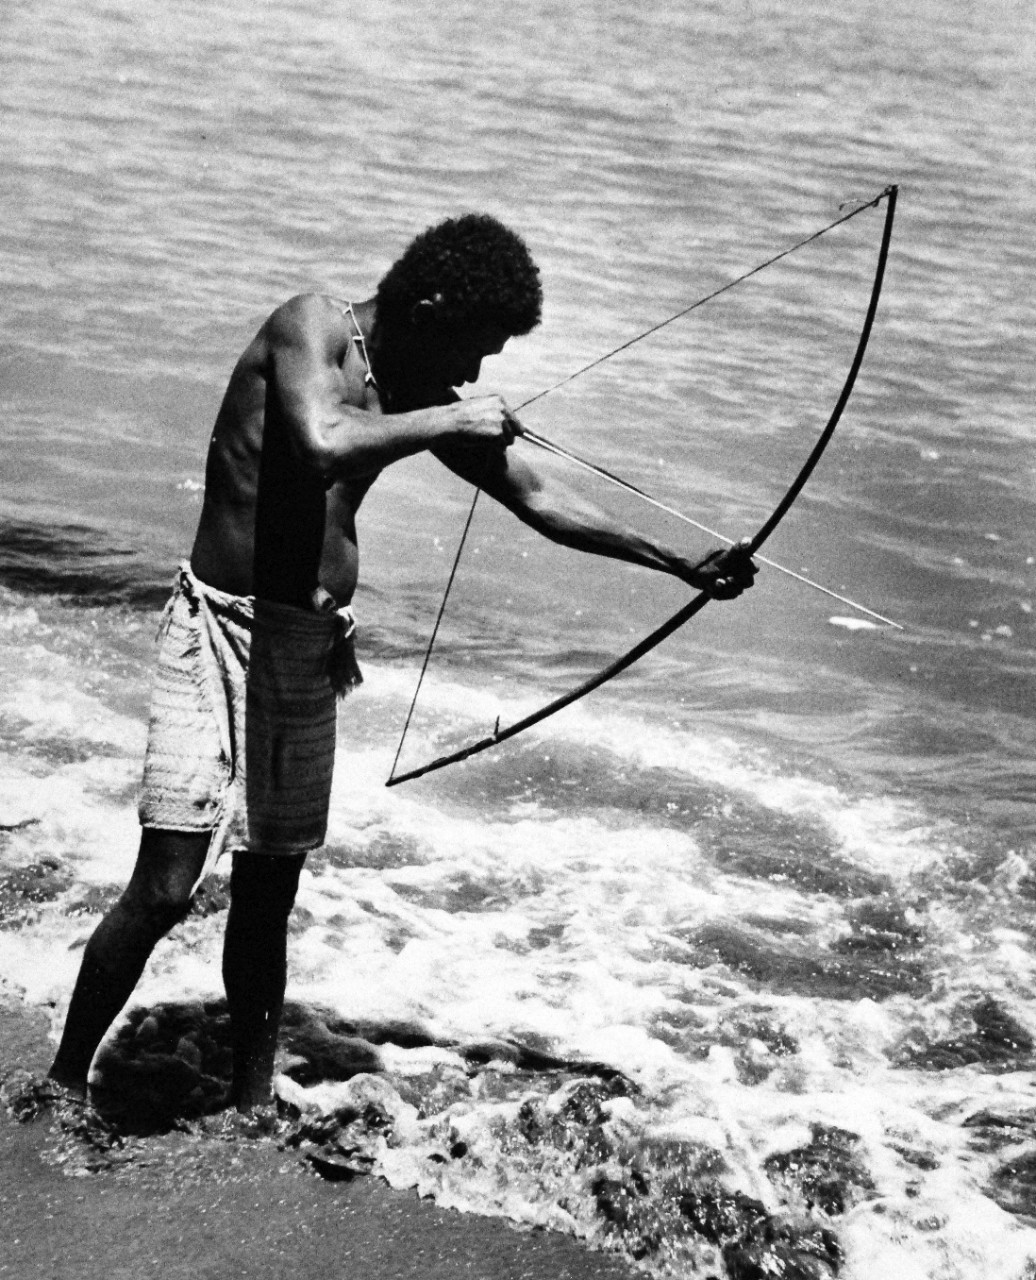 80-G-216094: Guadalcanal Island, Solomon Islands.  Bow and arrow is used by Solomon Island natives for fishing.  Note old towel used as loin cloth.  These fellows speak good English, are friendly and have saved many American pilot’s lives.  They fed and cared for injured pilots and took many a Navy flier through Japanese lines to safety during the Battle of Guadalcanal.  Photograph released February 6, 1944.  U.S. Navy Photograph, now in the collections of the National Archives.  (2016/11/25).